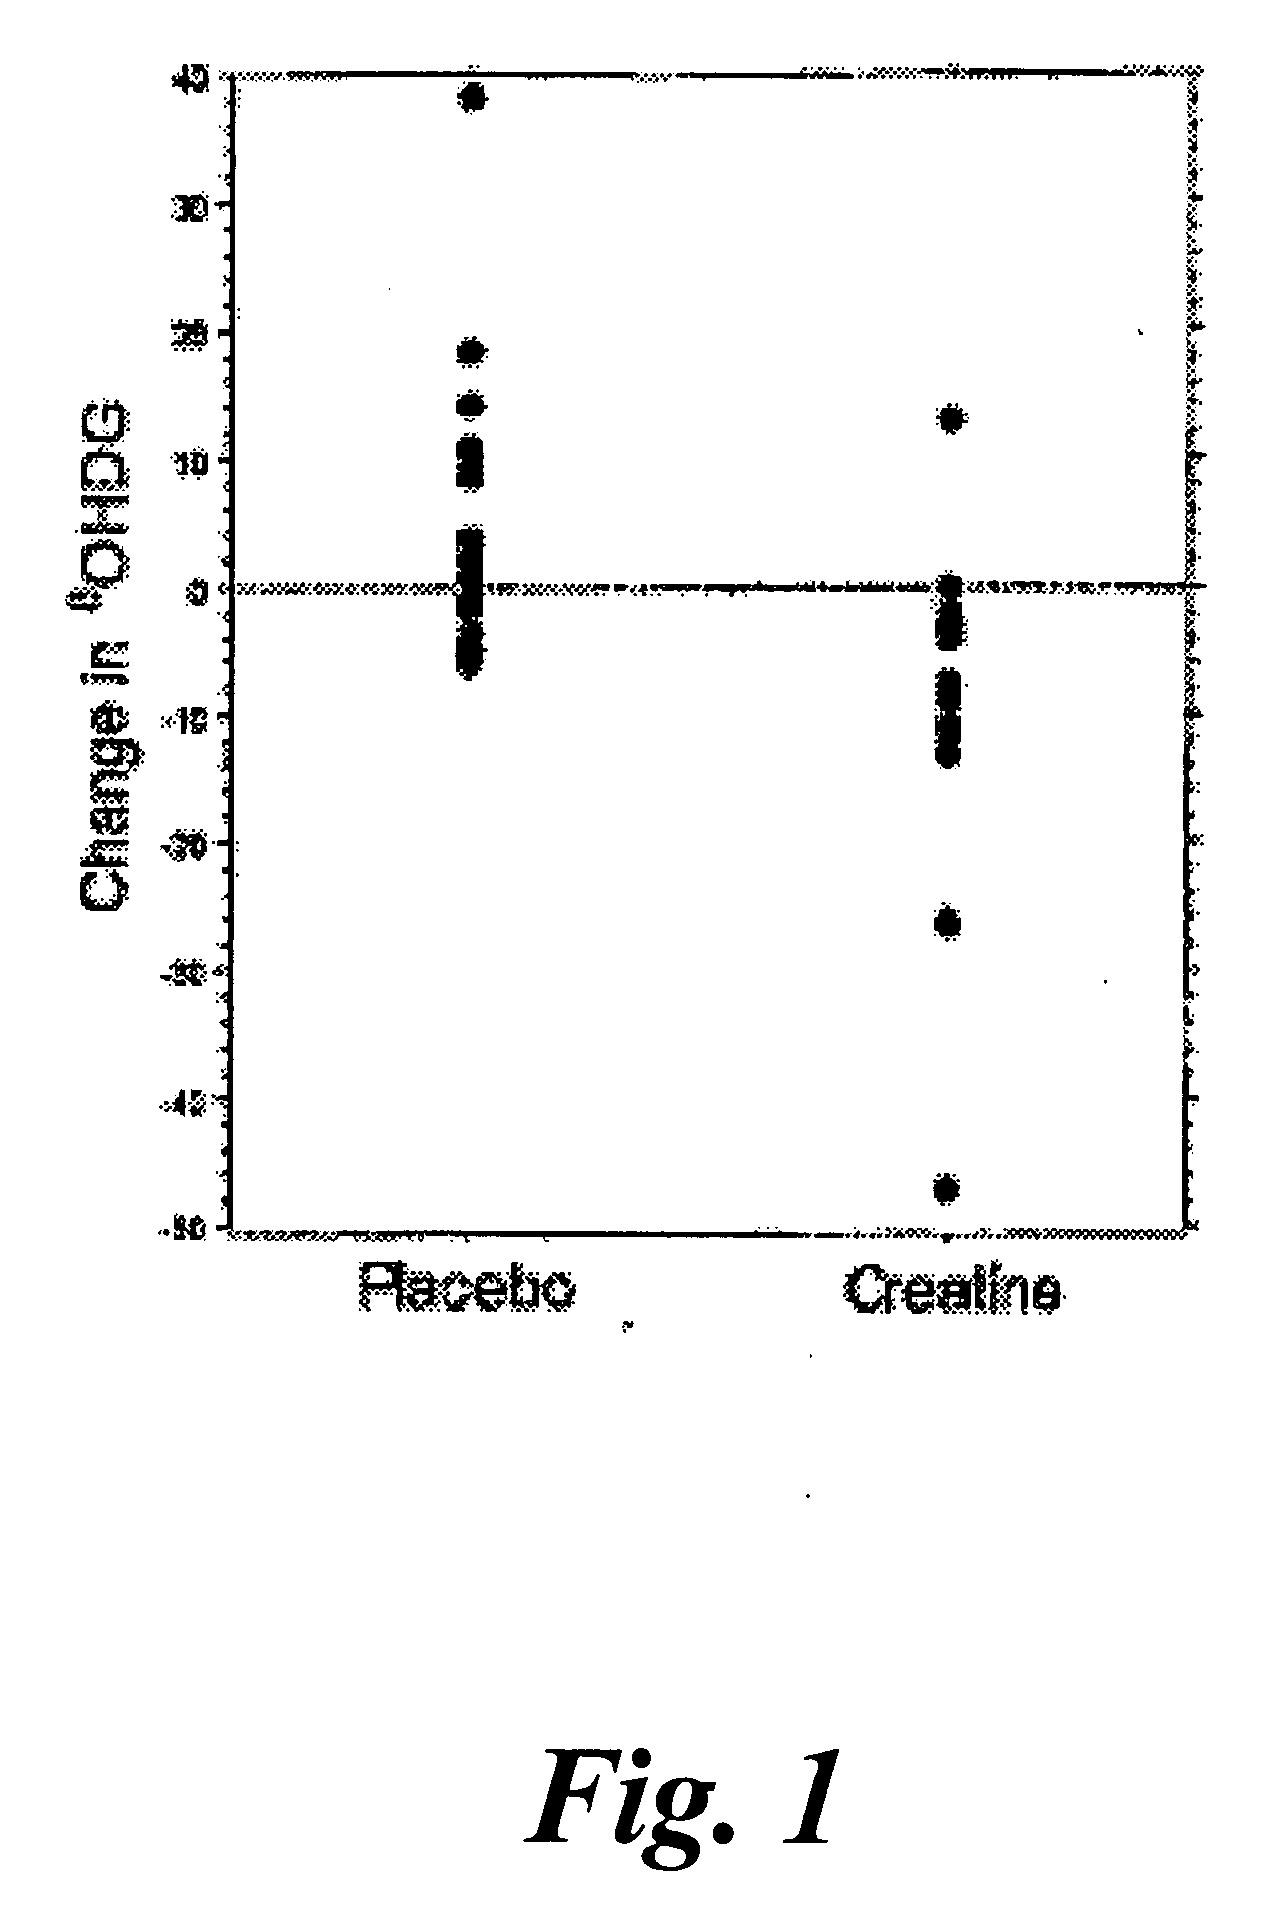 Methods of treating a neurological disorder with creatine monohydrate